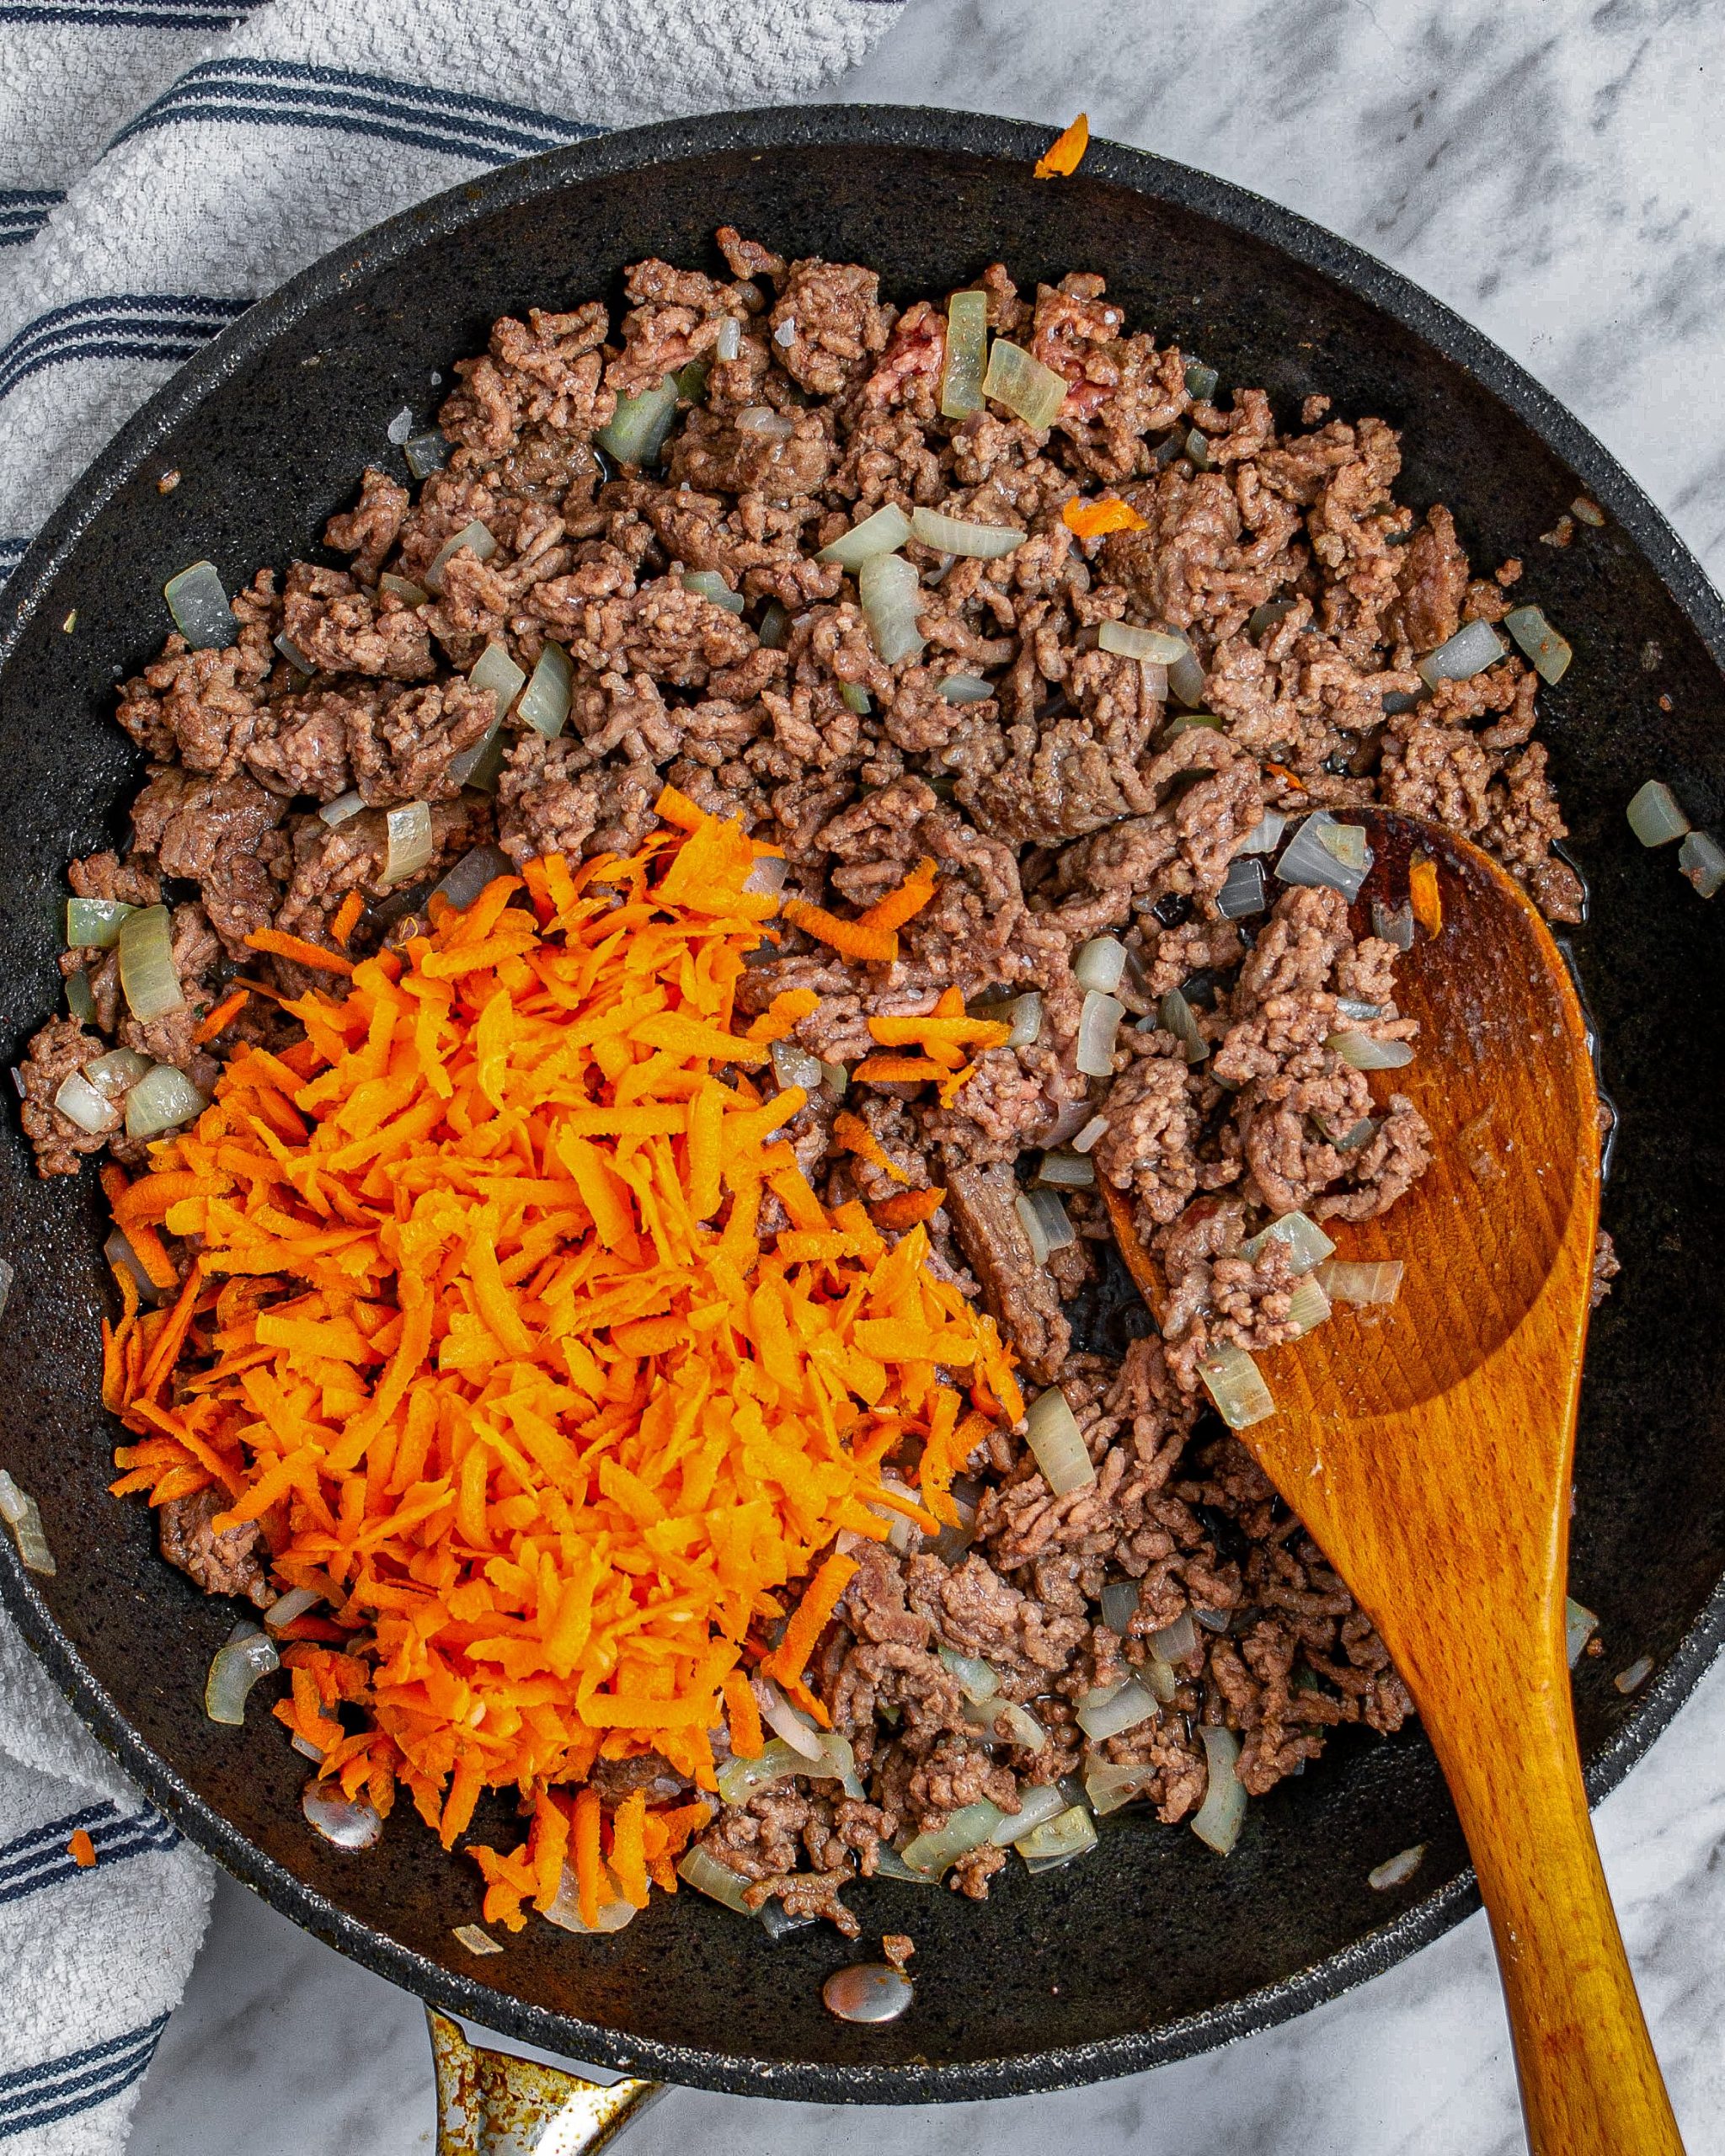 When the meat is halfway browned, mix the shredded carrots into the skillet.